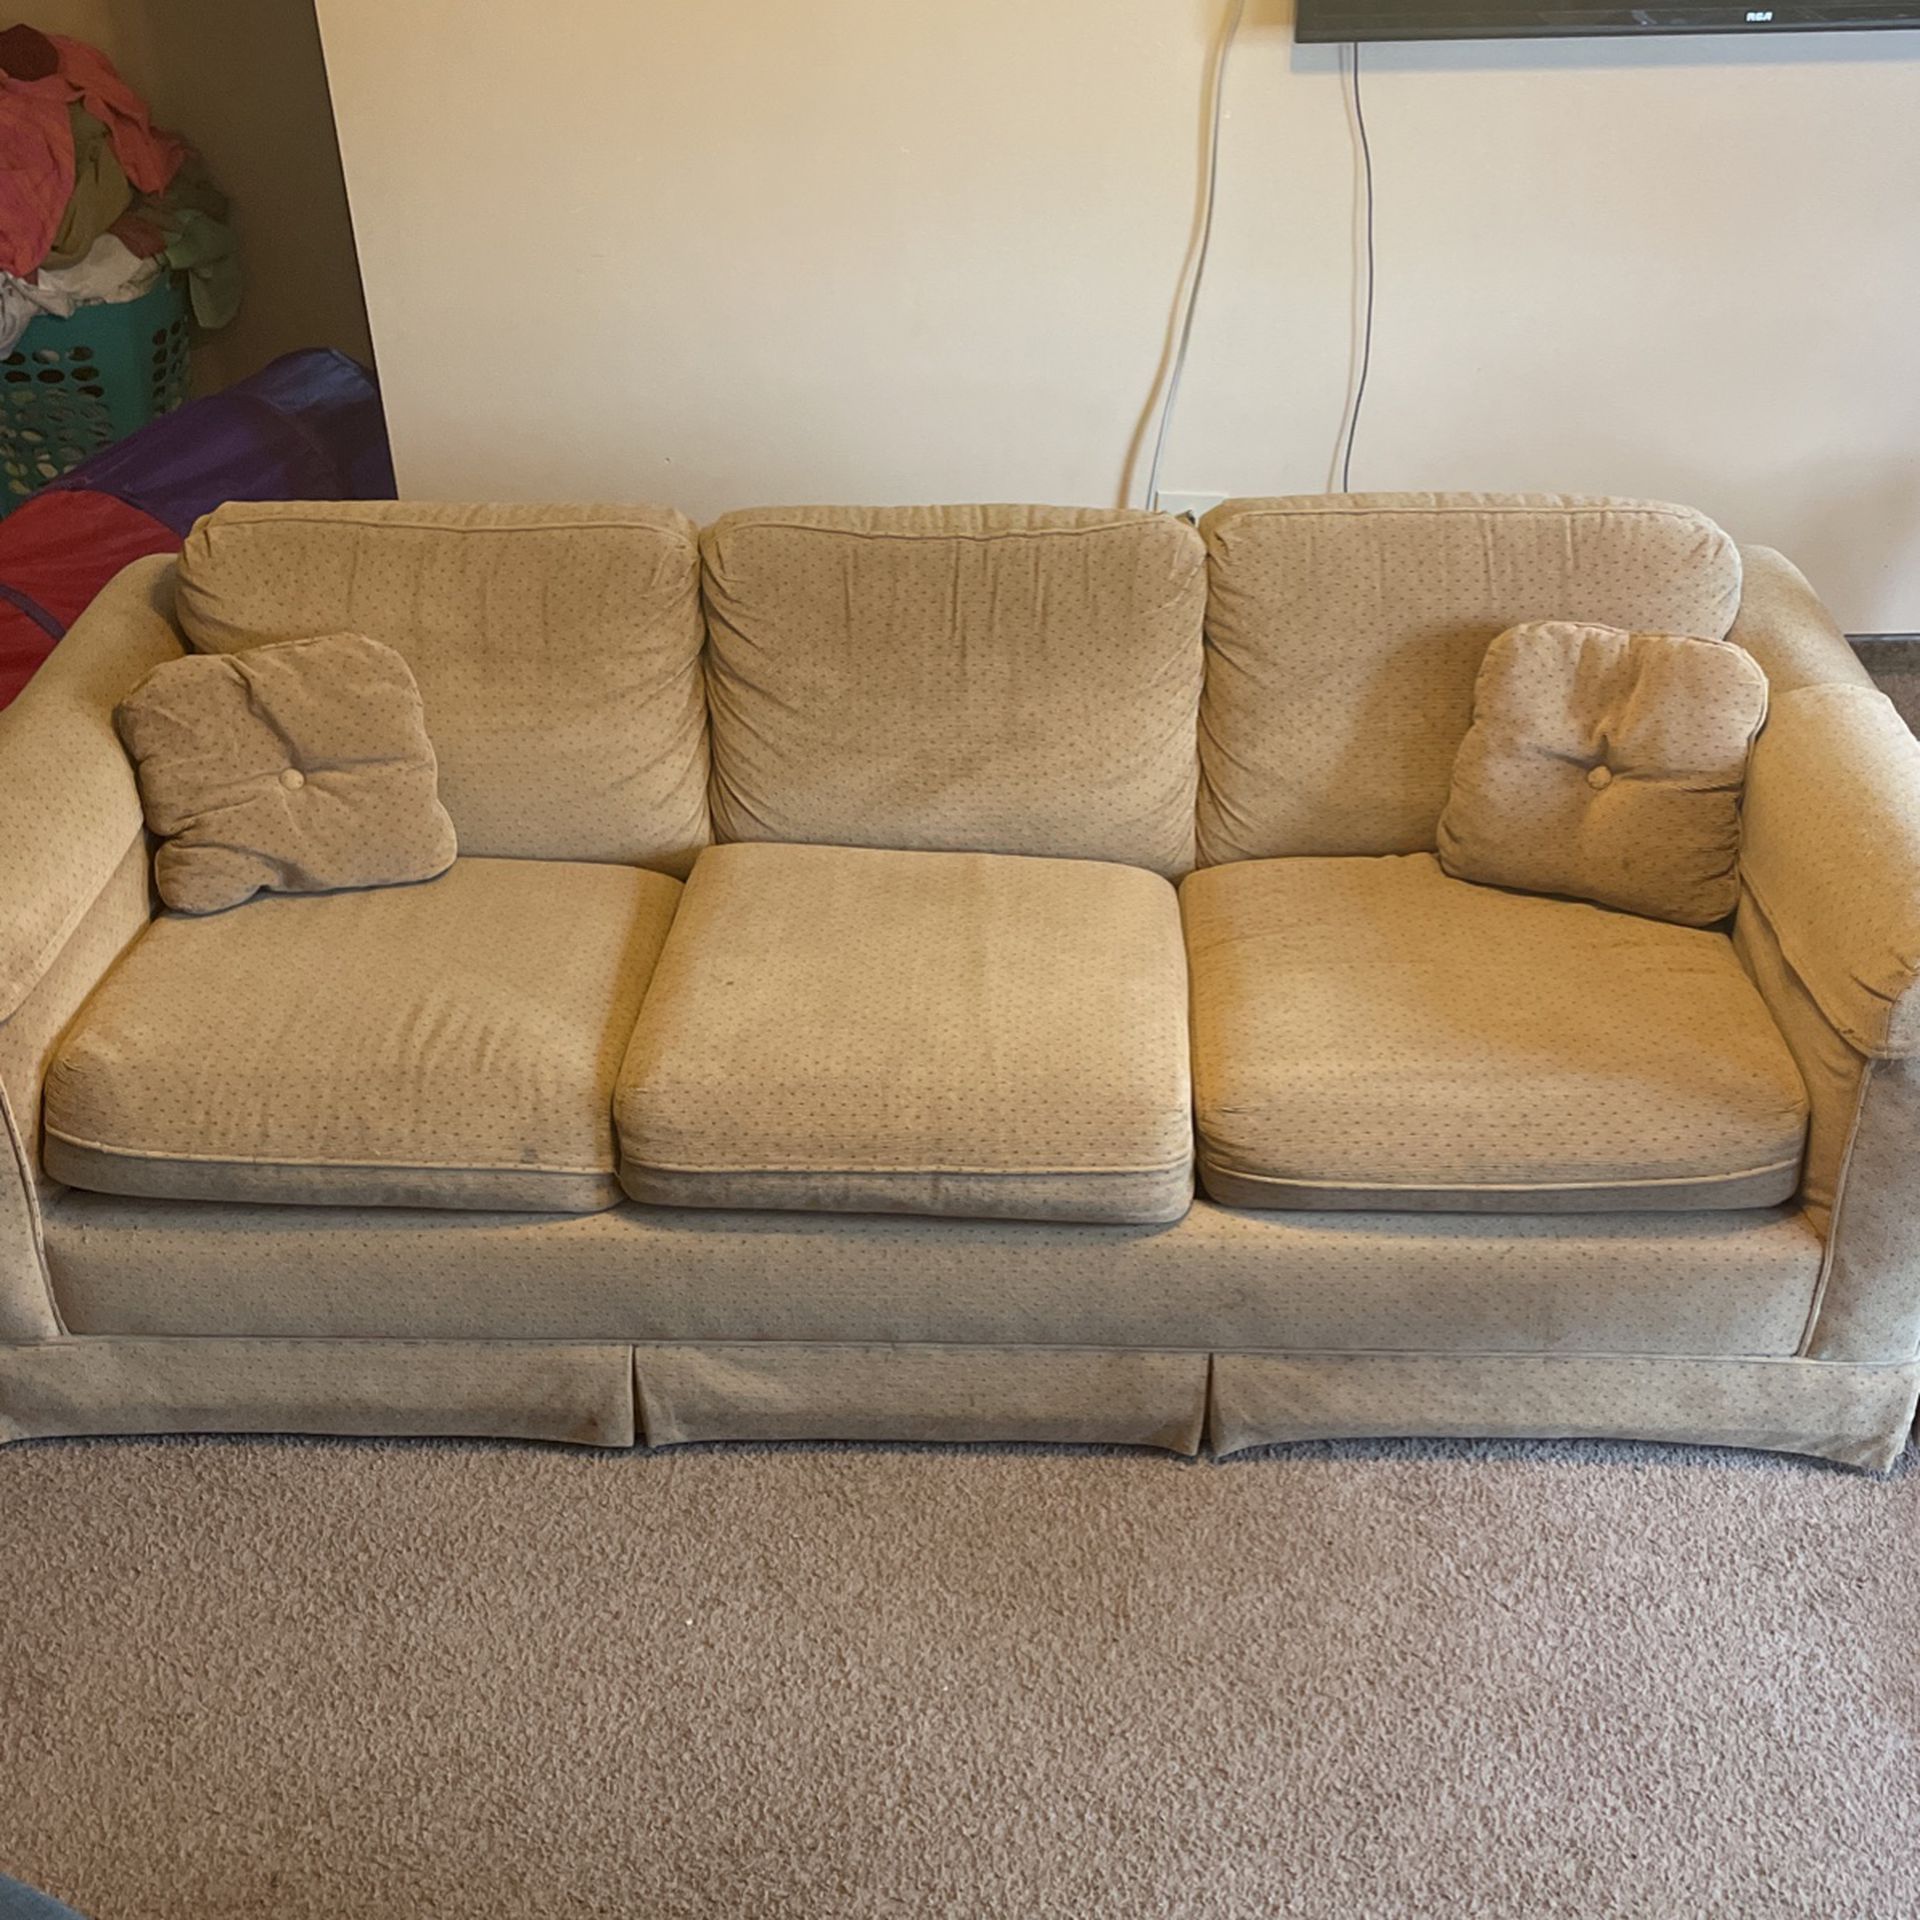 Pull out couch